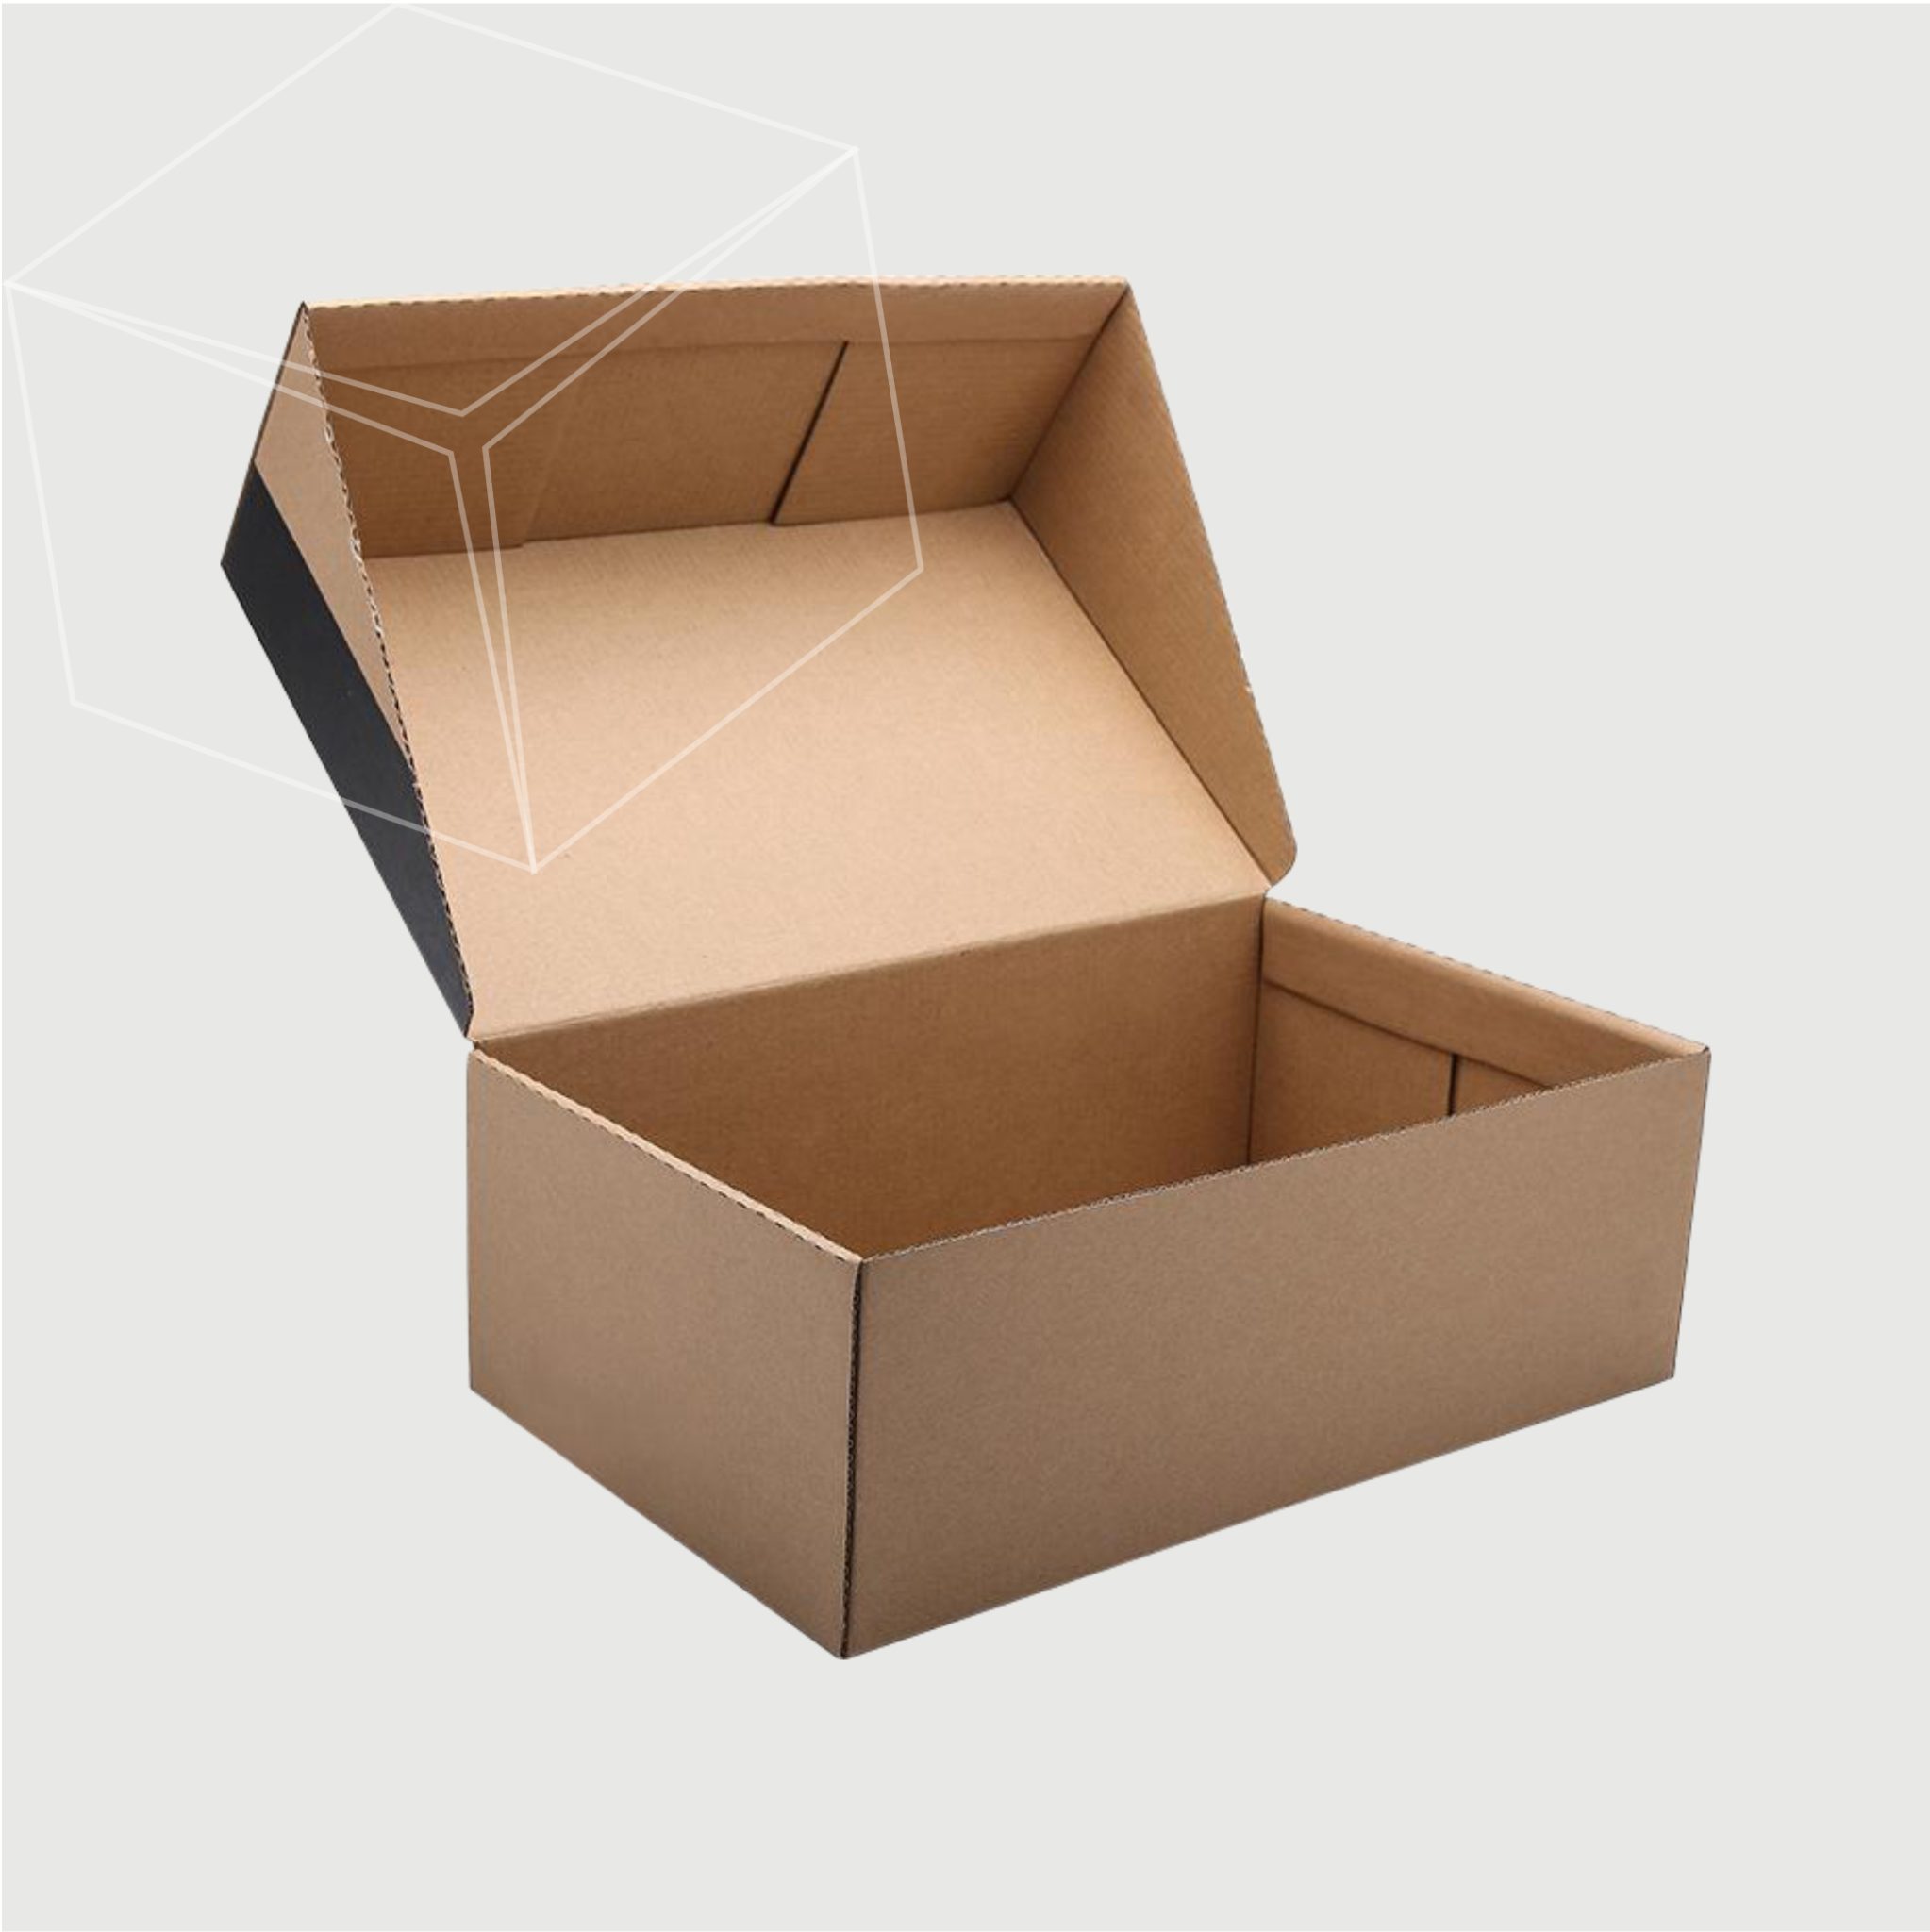 Shoes Box - Buy Shoes Box online at Best Prices in India